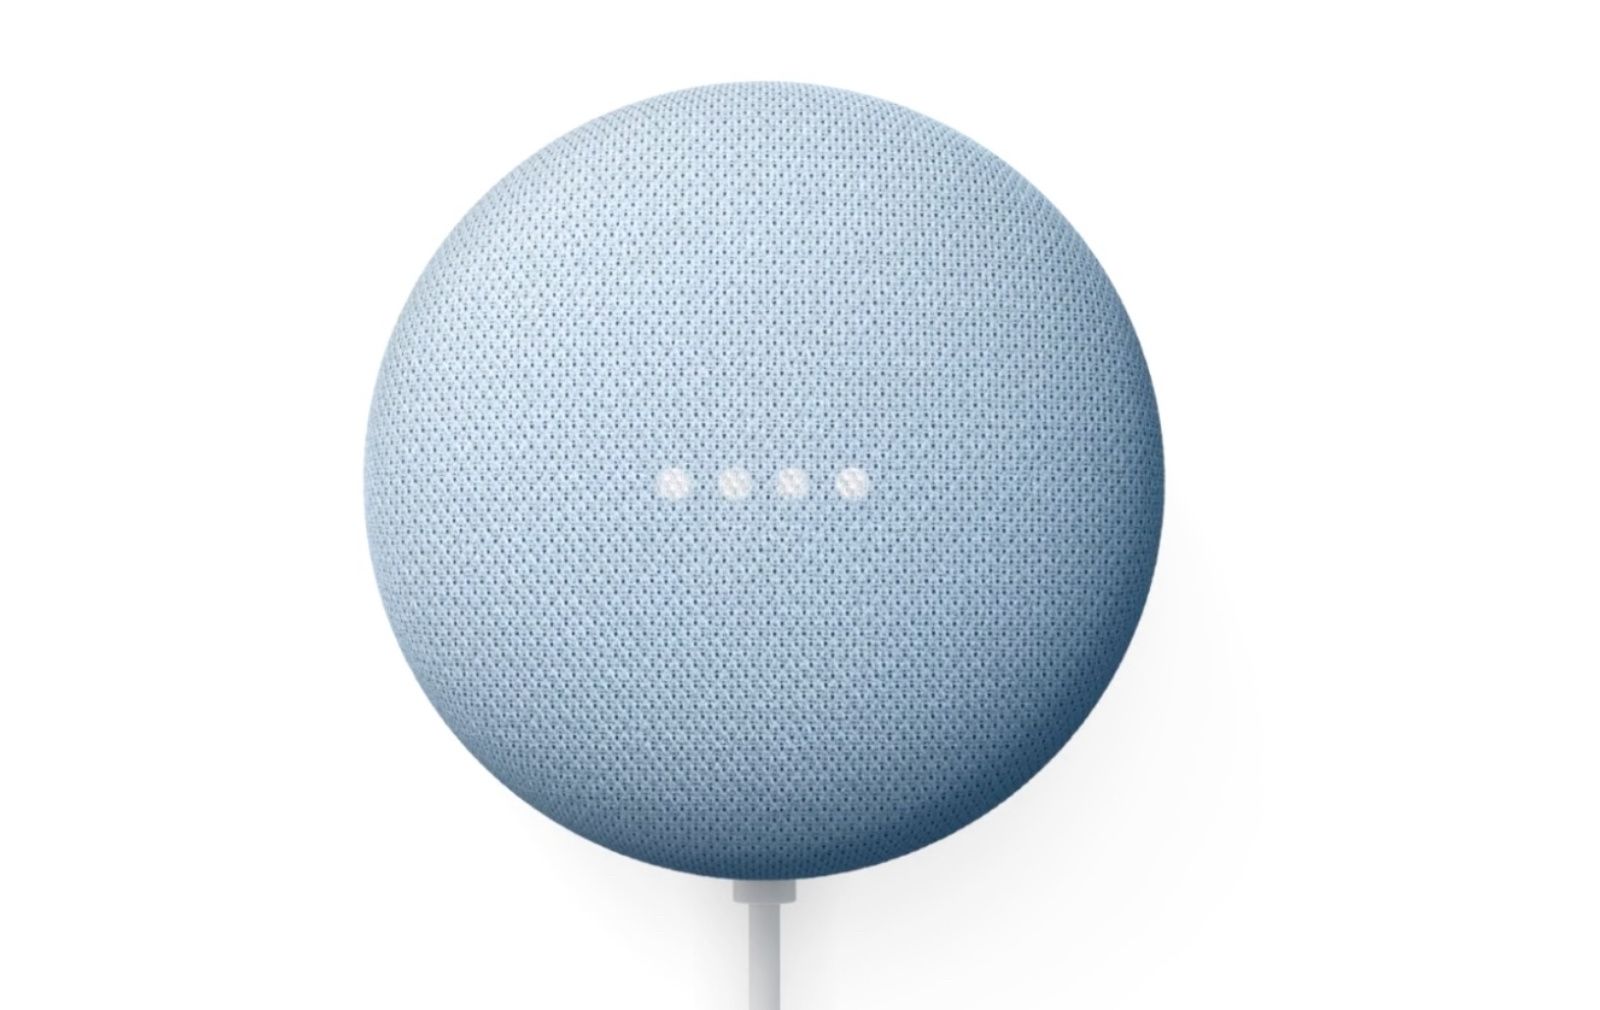 The Nest Mini smart speaker with Google Assistant